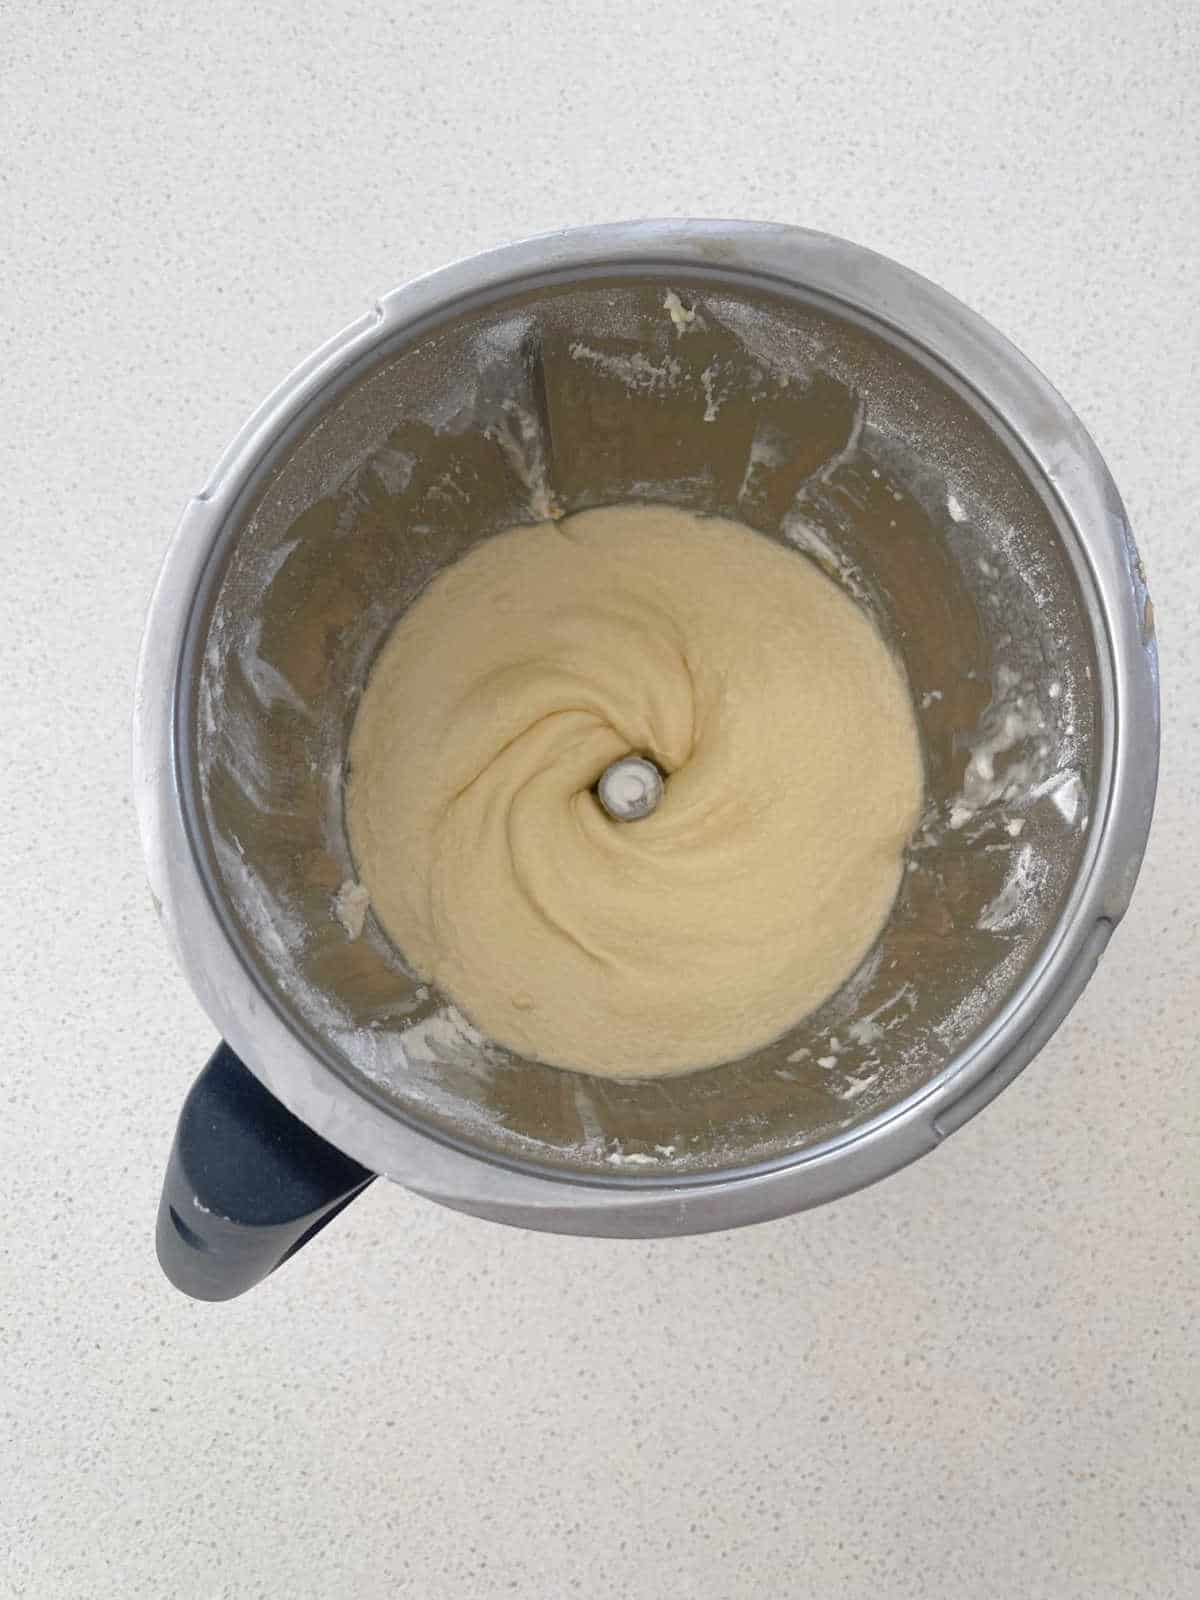 patty cake mixture in thermomix bowl.